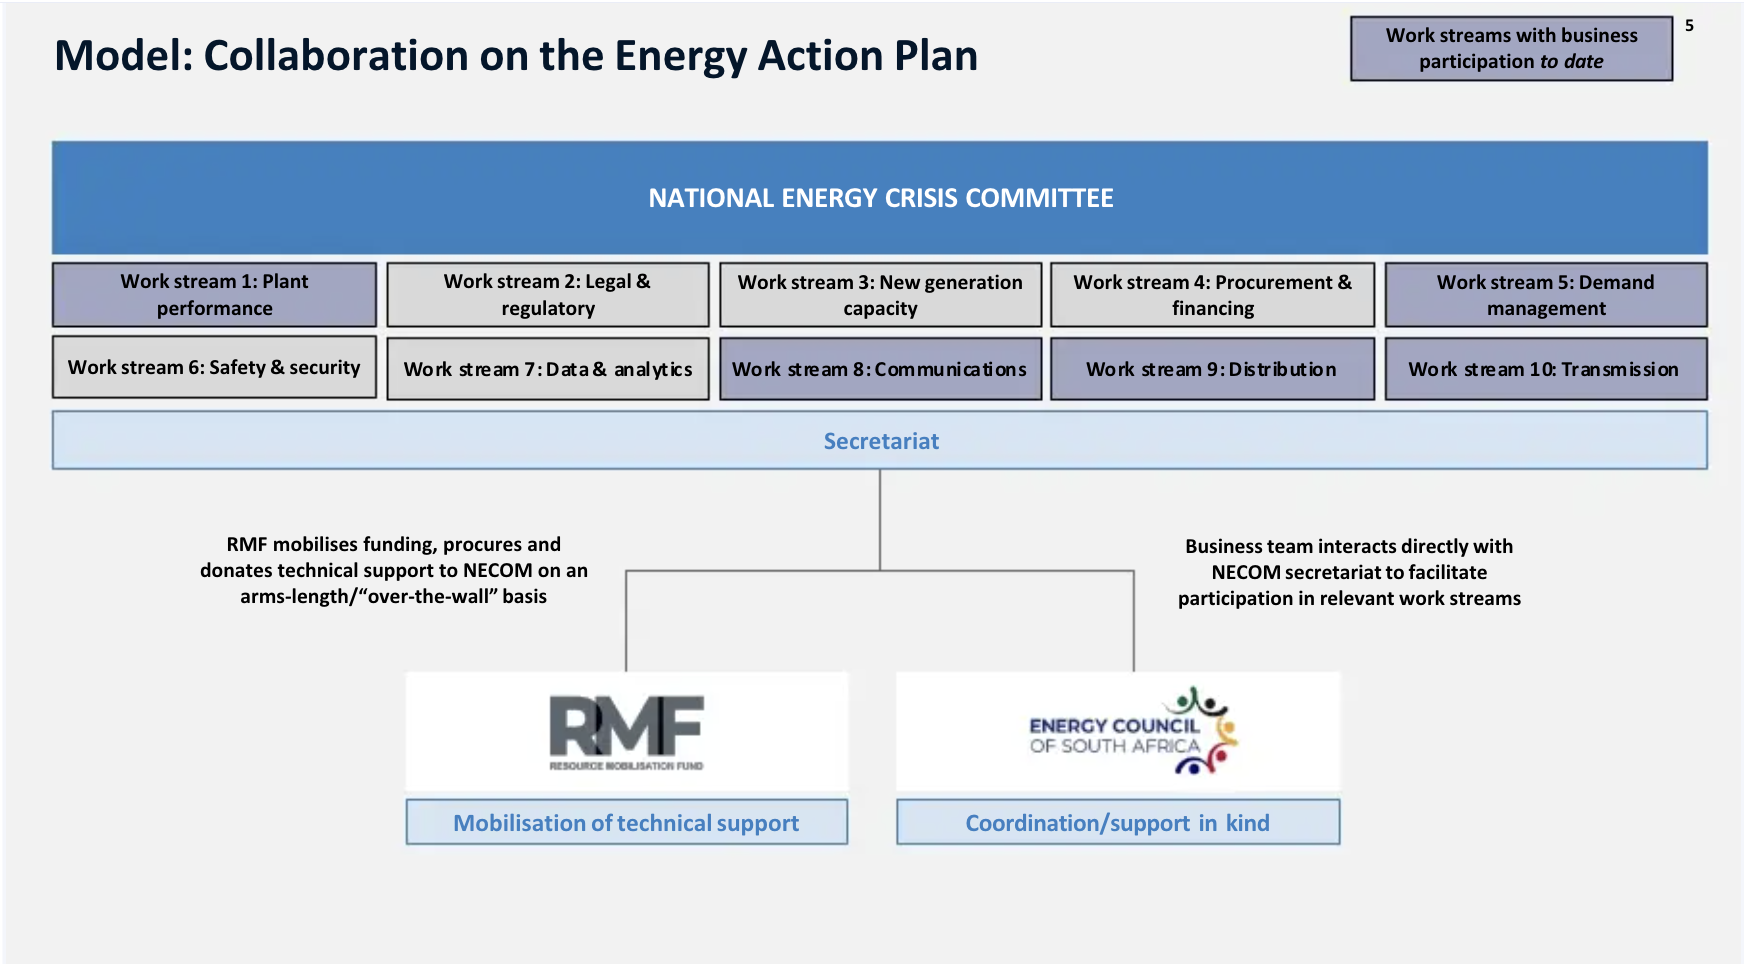 Model: Collaboration on the Energy Action Plan